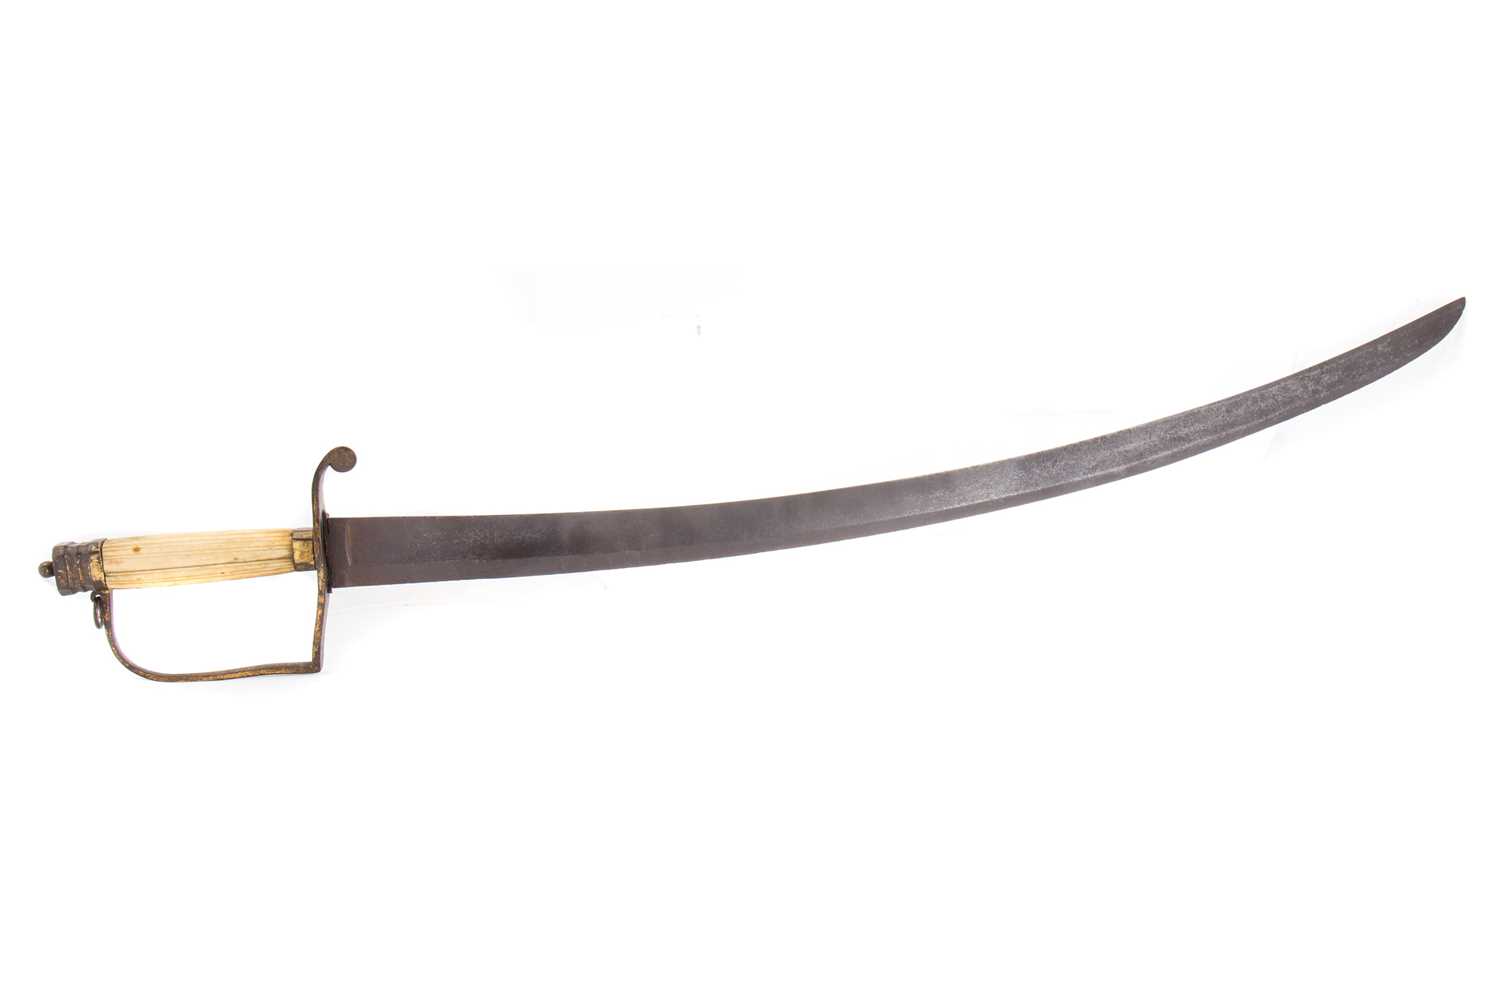 BRITISH 1796-TYPE LIGHT CAVALRY SWORD LATE 18TH/EARLY 19TH CENTURY - Image 2 of 2